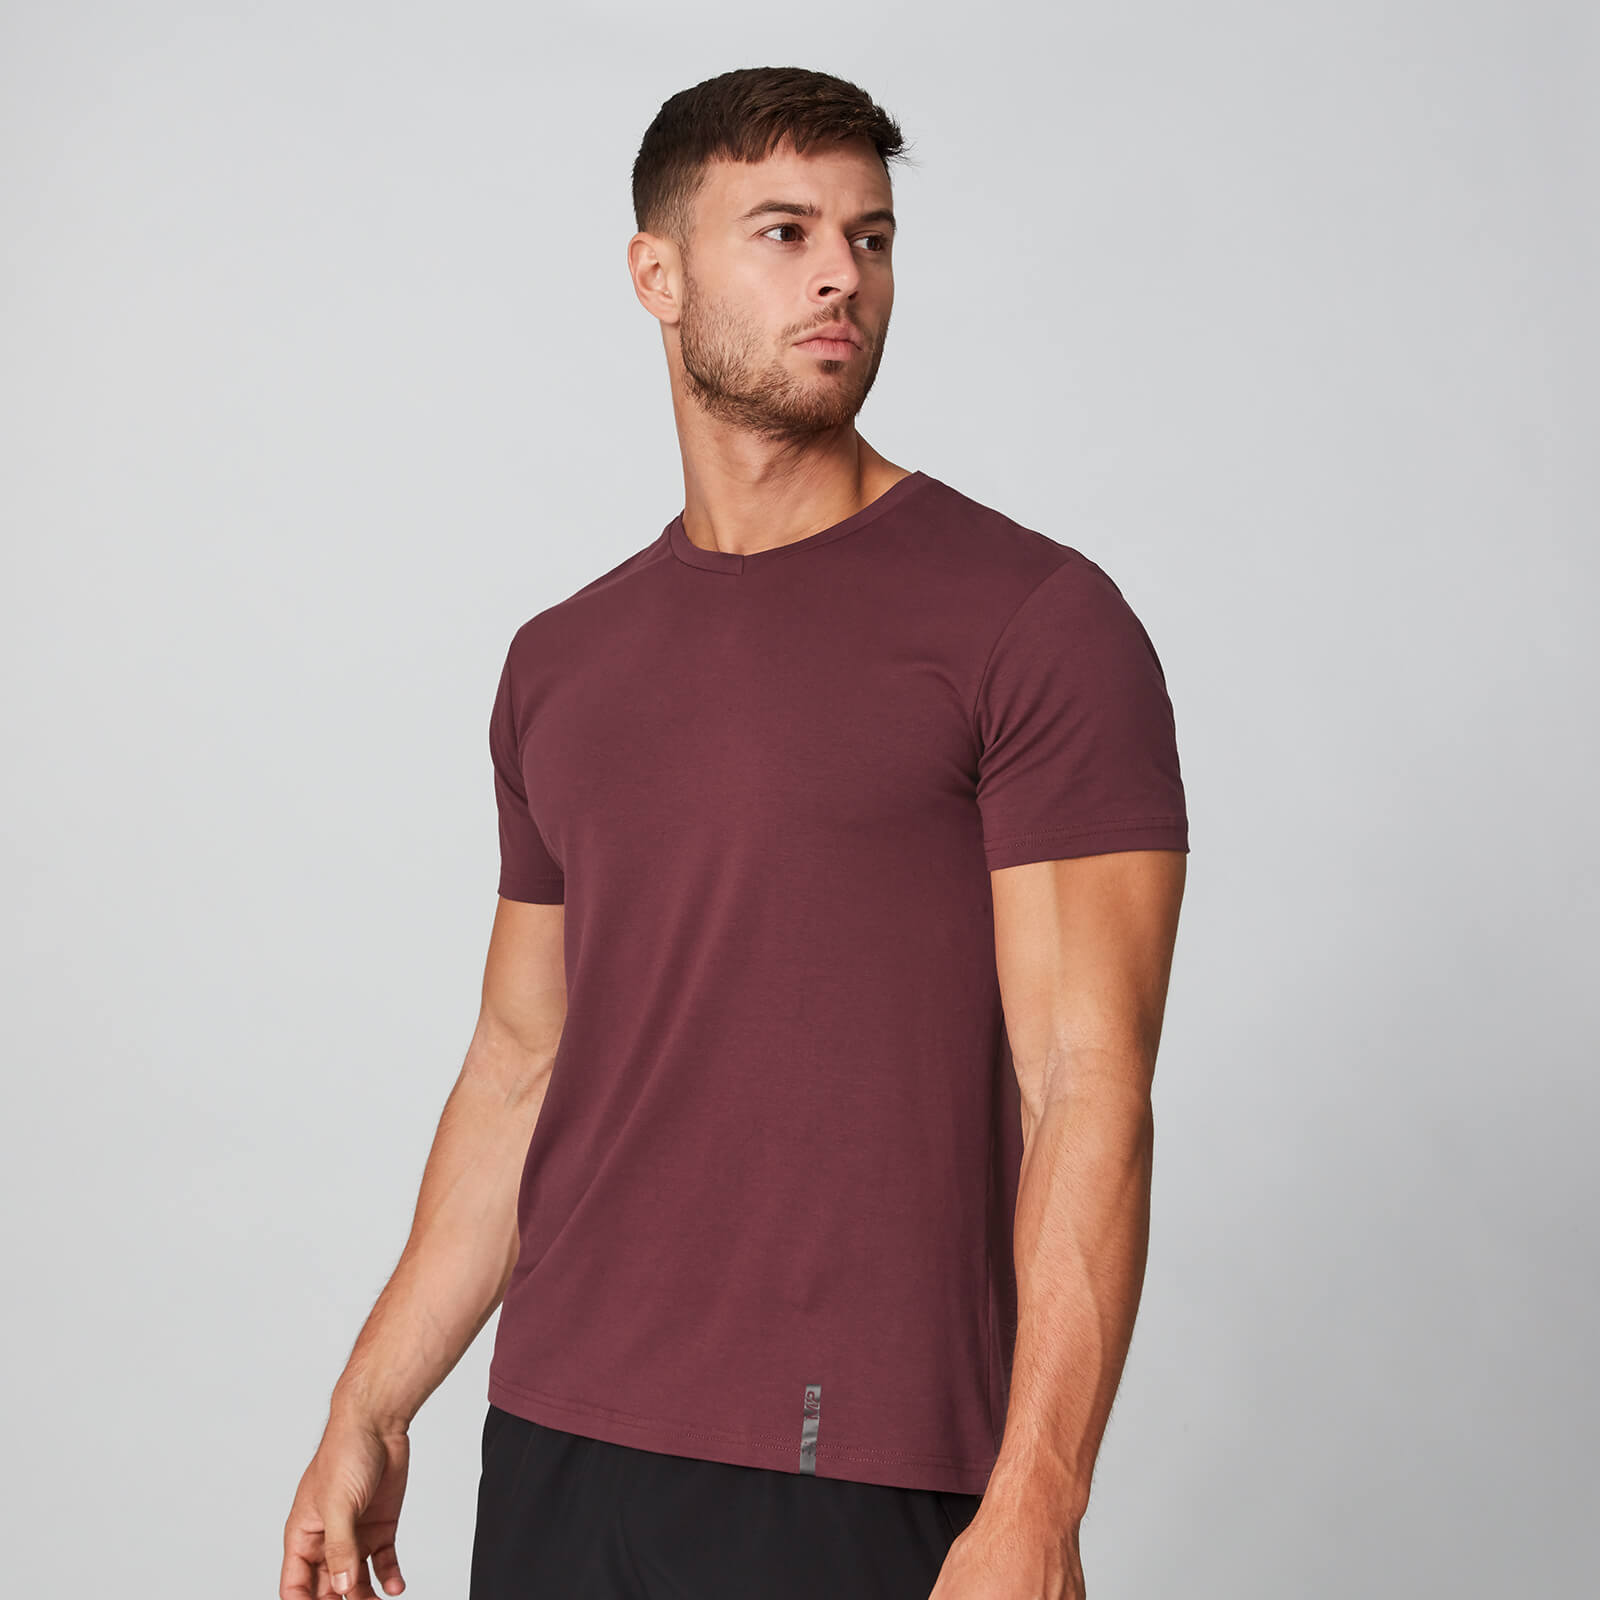 Luxe Classic V-Neck T-Shirt - Oxblood - S